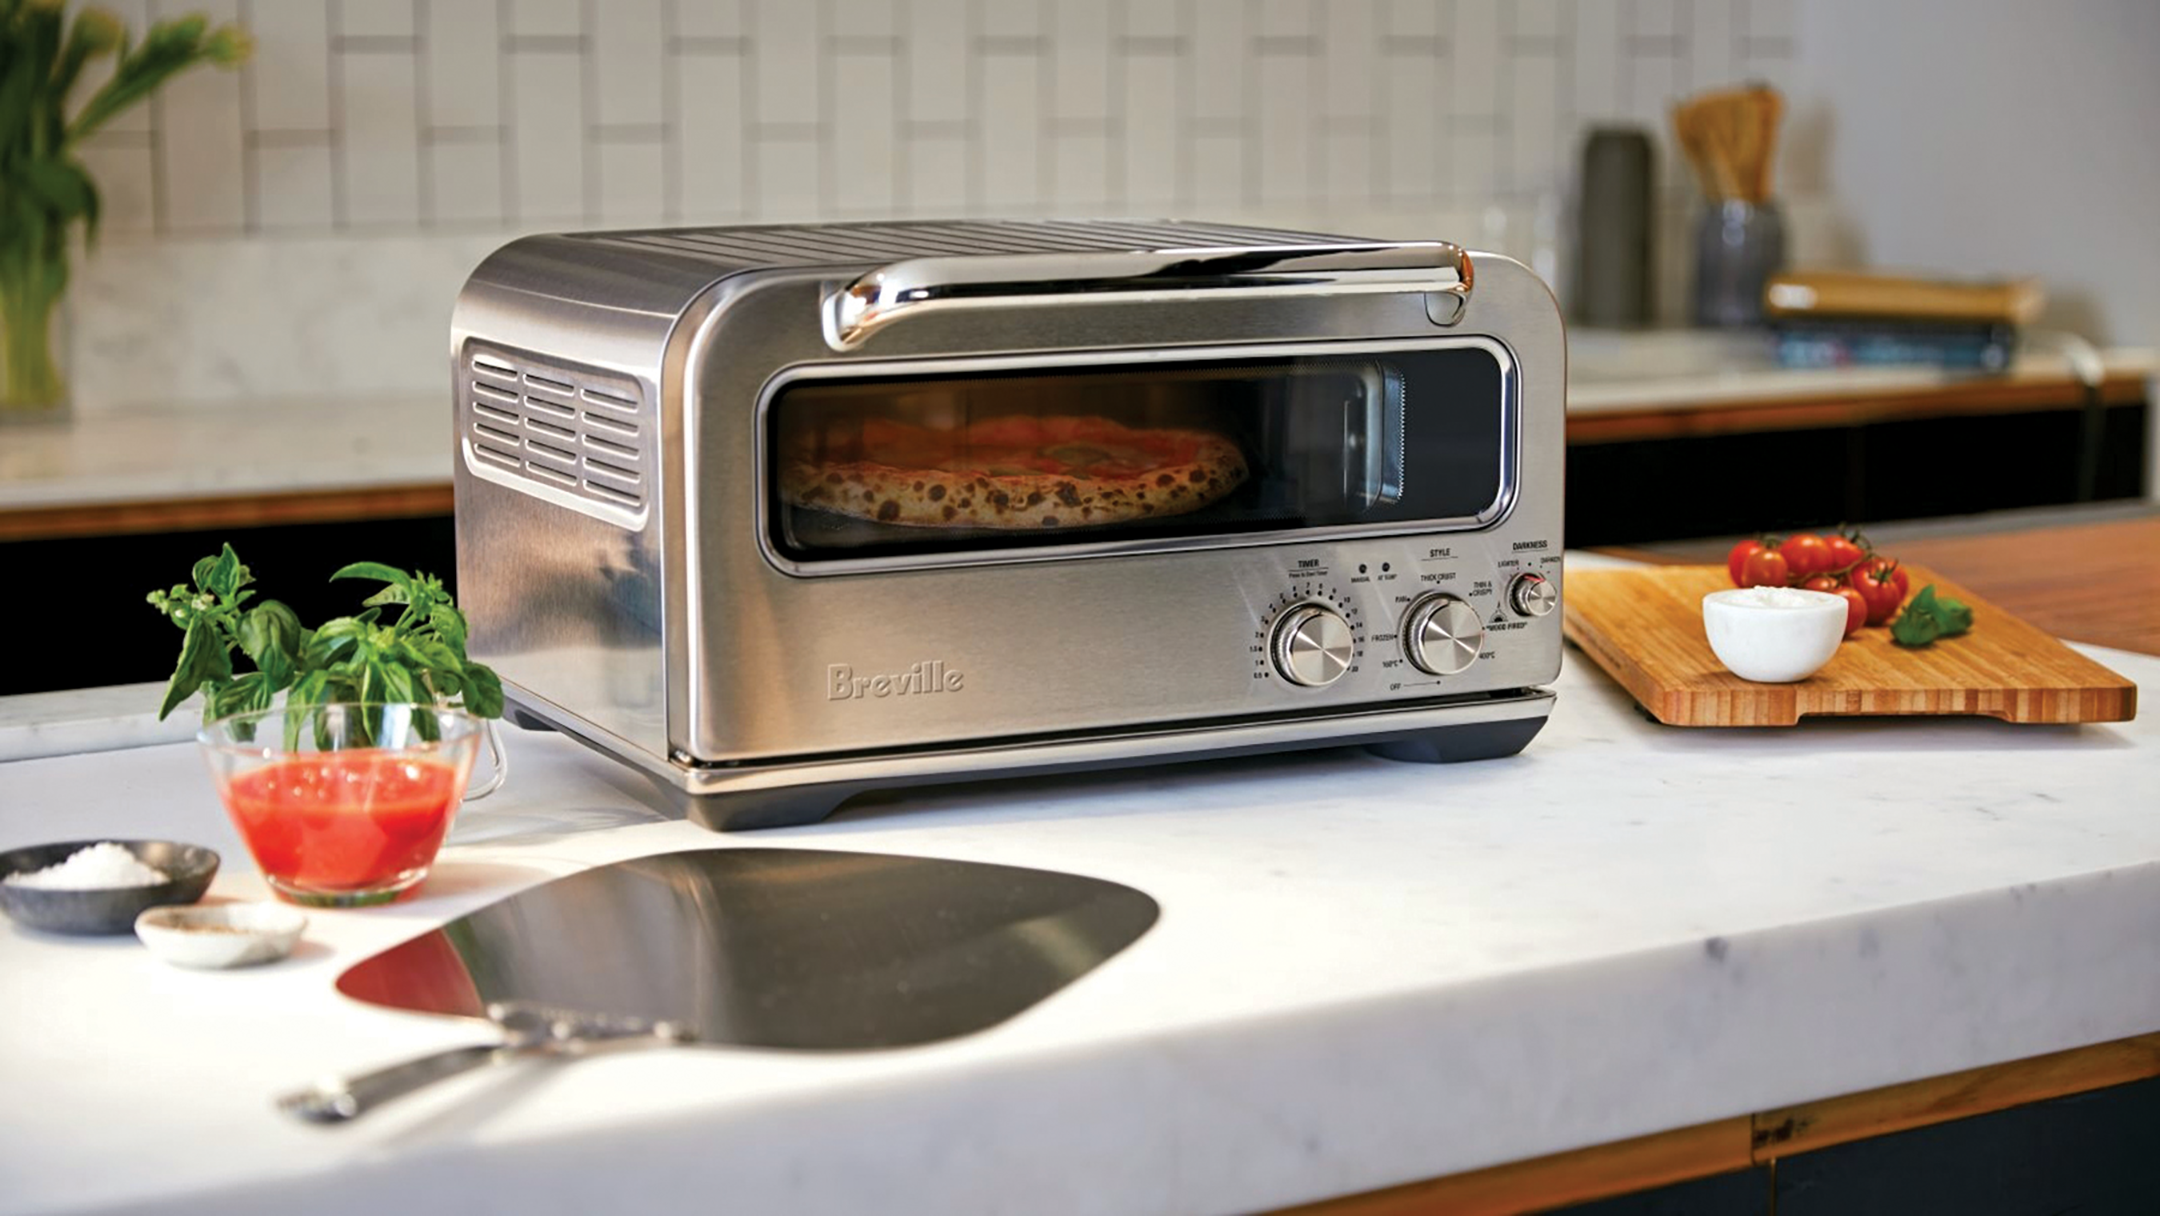  Say ciao to the  Pizzaiolo  by Breville, the first domestic countertop oven to hit 750°F, that cooks authentic wood-fired style pizzas in two minutes. Replicating the three types of heat generated by a brick oven – conductive, radiant and convective